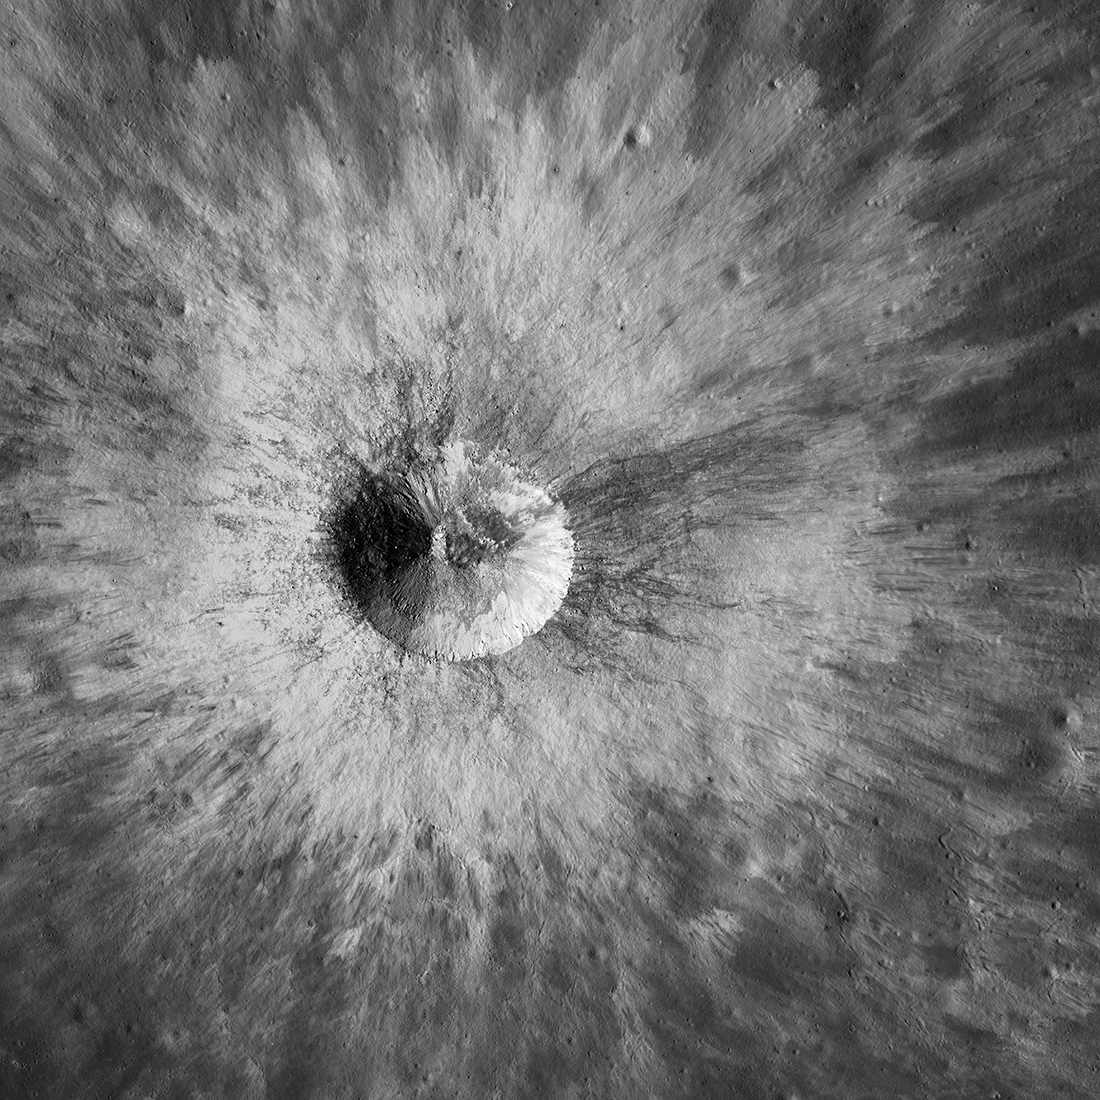 Bright crater seen from directly above, with rays of ejected lunar surface material extending in all directions.